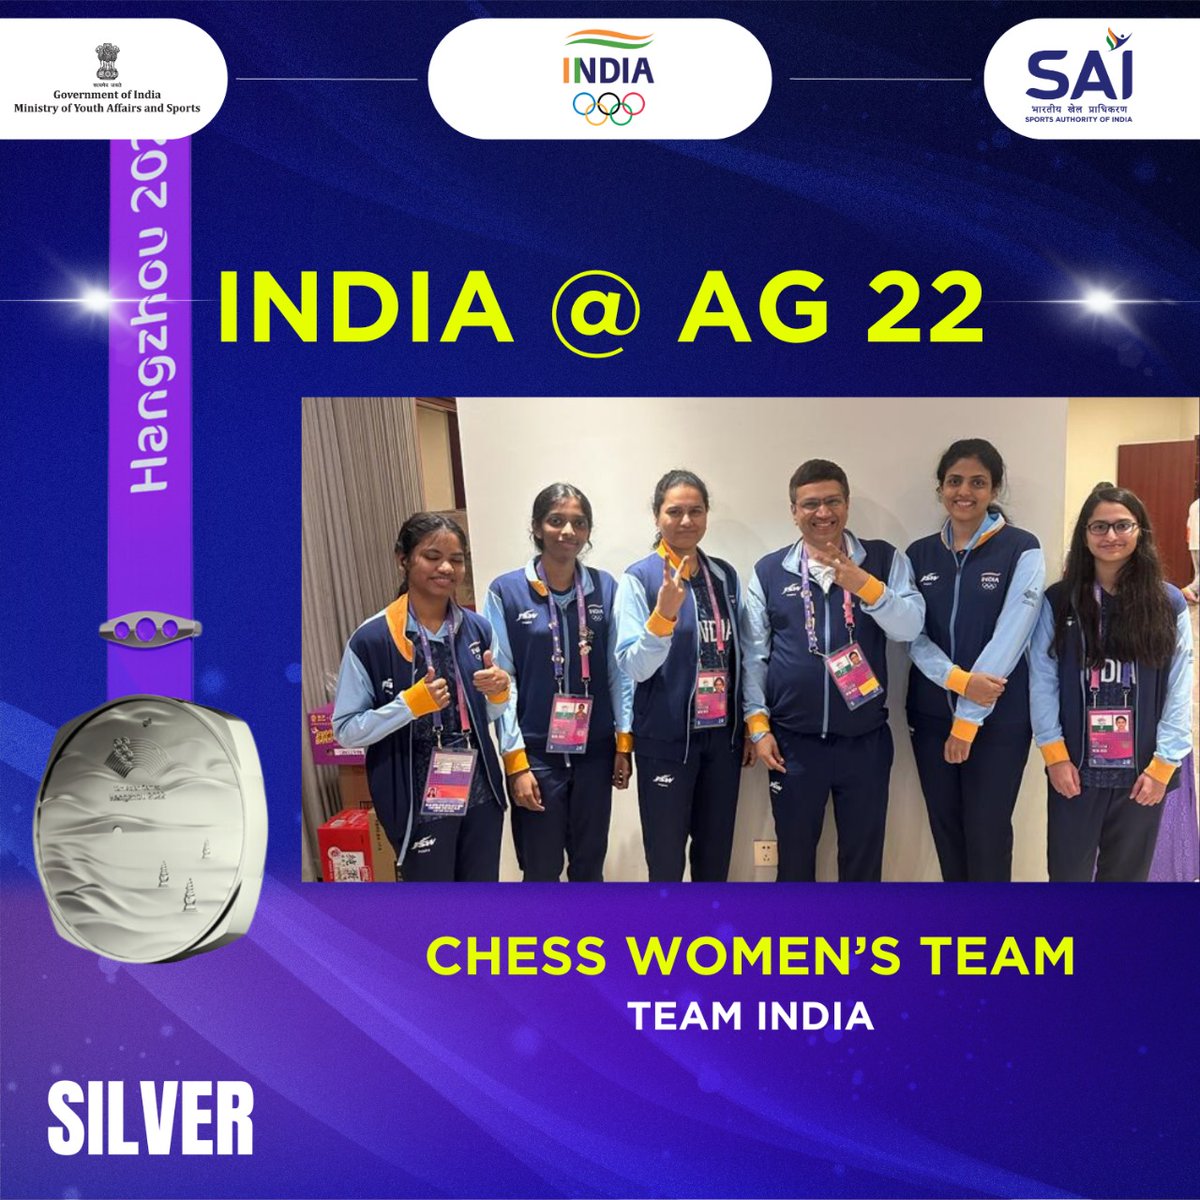 A Silver lined victory for our♟️women's team at #AsianGames2022 The team consisting of @humpy_koneru, @HarikaDronavali, @chessvaishali , @vantikachess & Savitha Shri finished 2️⃣nd among 12 teams following a total of 9 matches over the course of 9 days! 🇮🇳 Many congratulations…